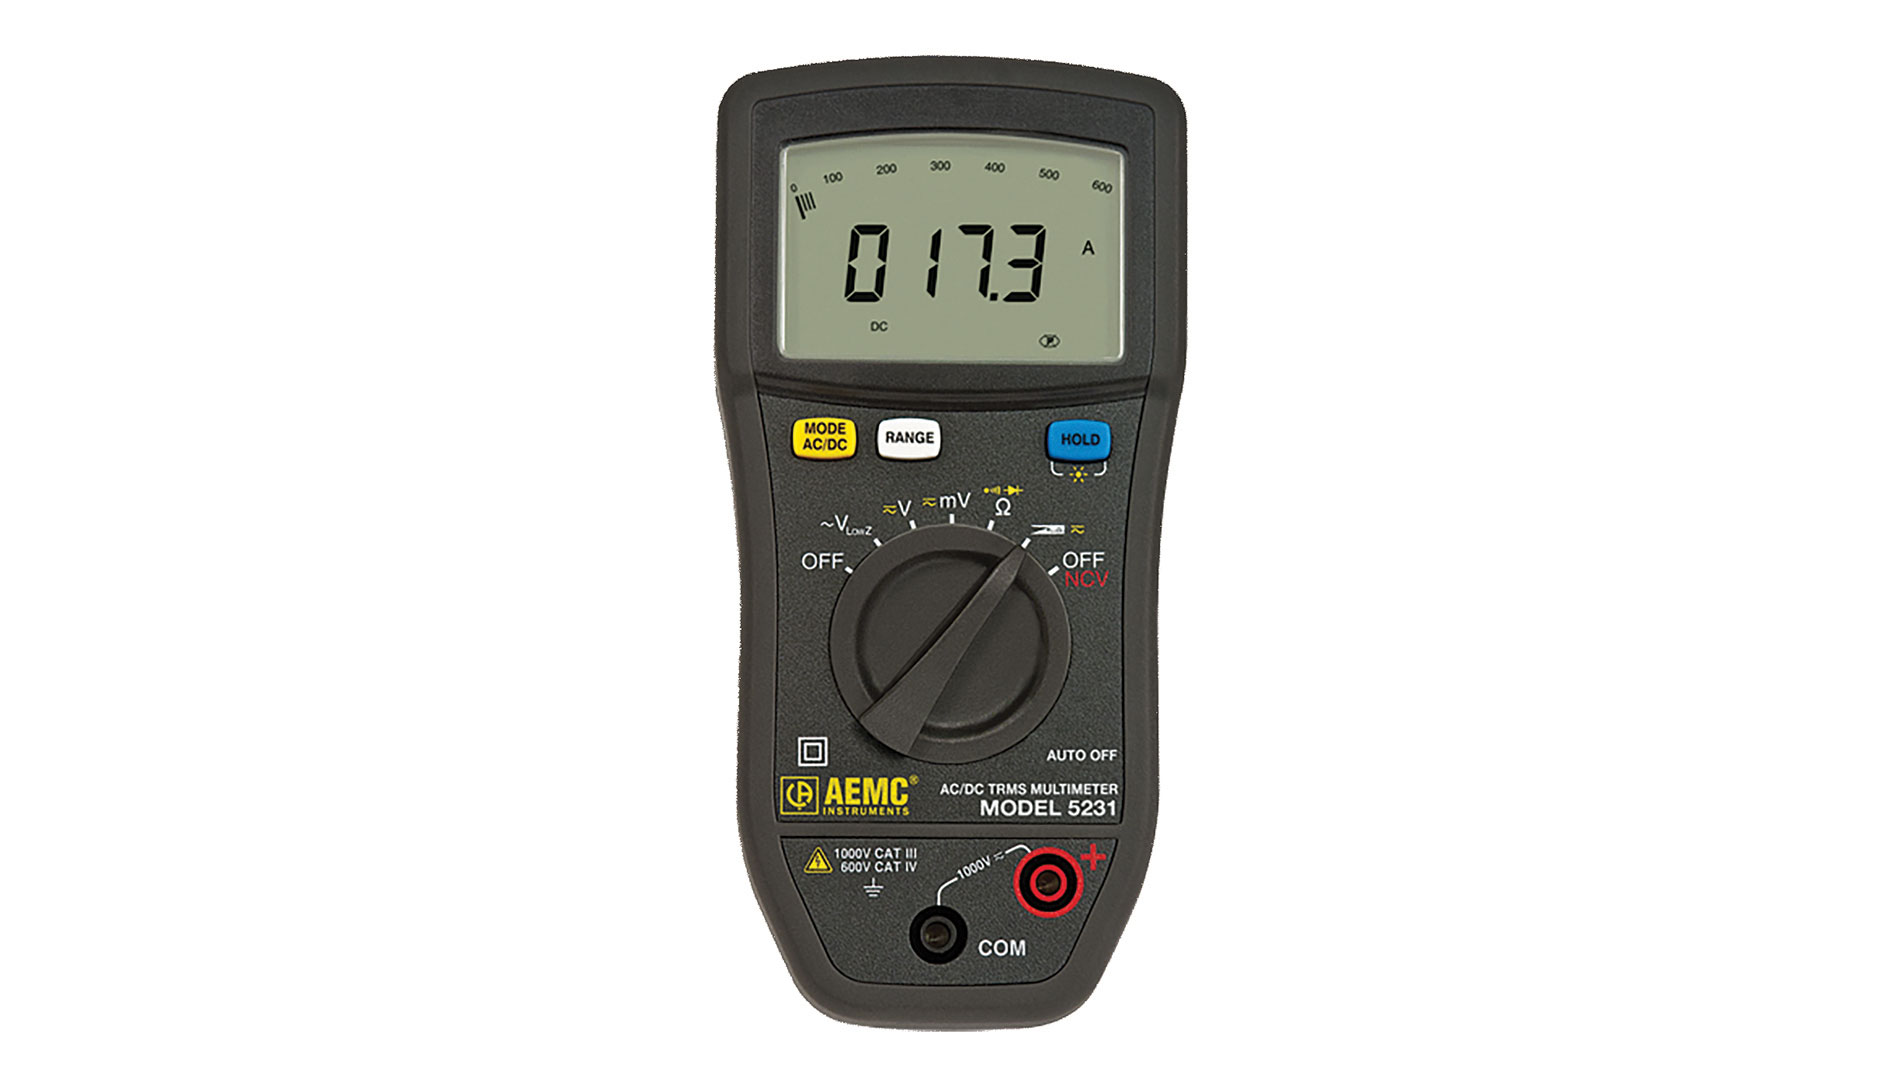 Multicolored multimeter with digital readout. Image by AEMC.